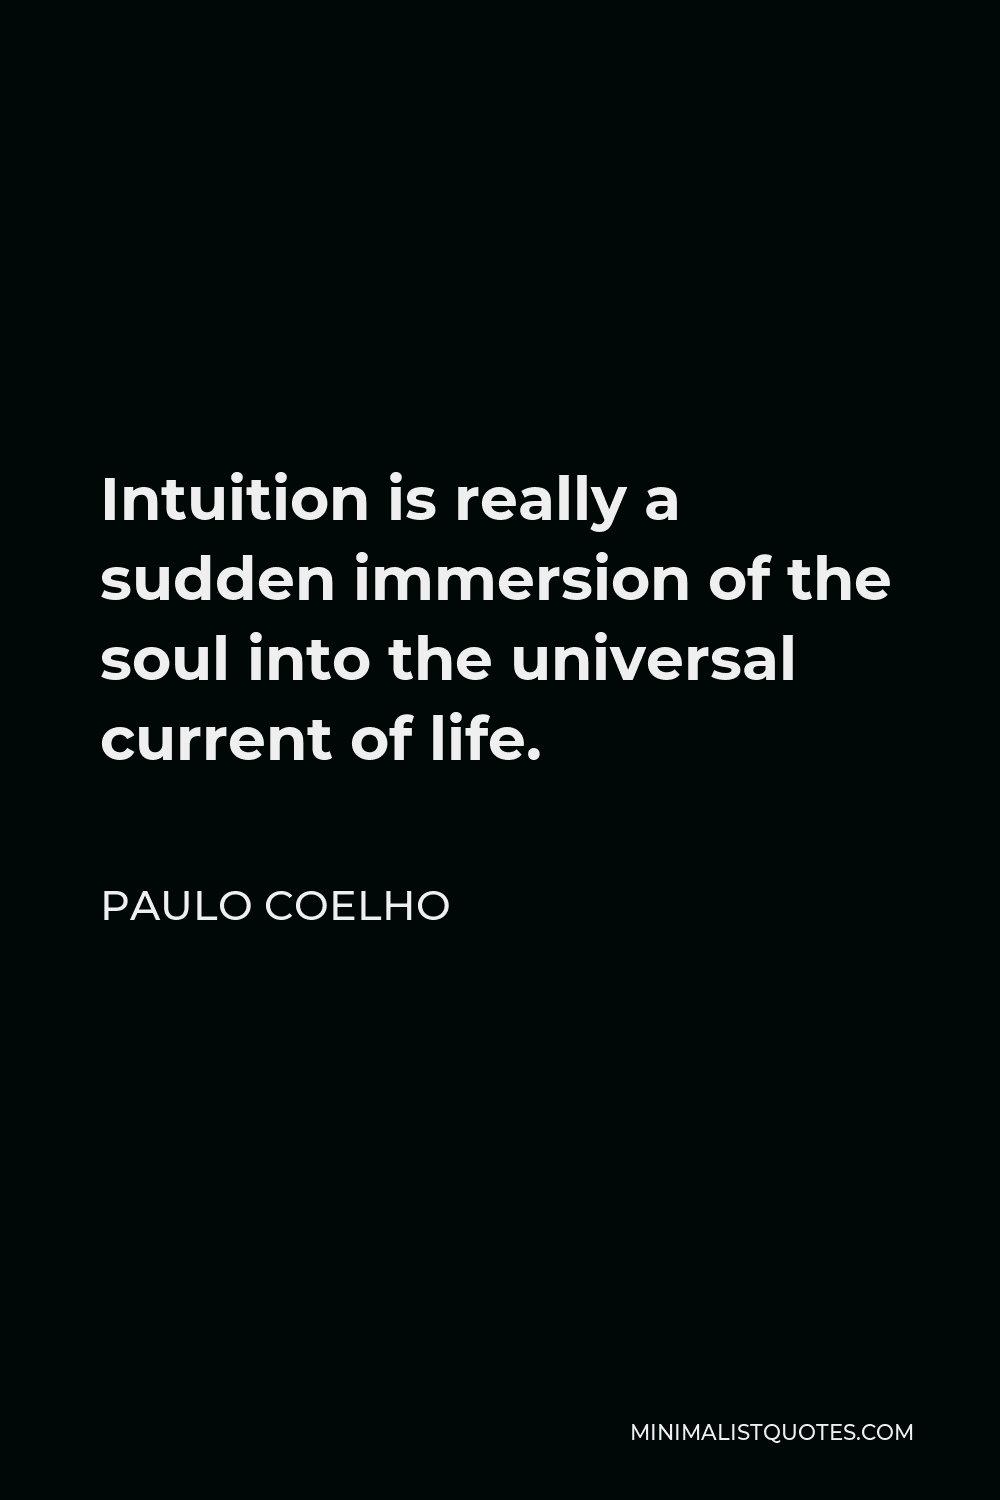 Paulo Coelho Quote - Intuition is really a sudden immersion of the soul into the universal current of life.